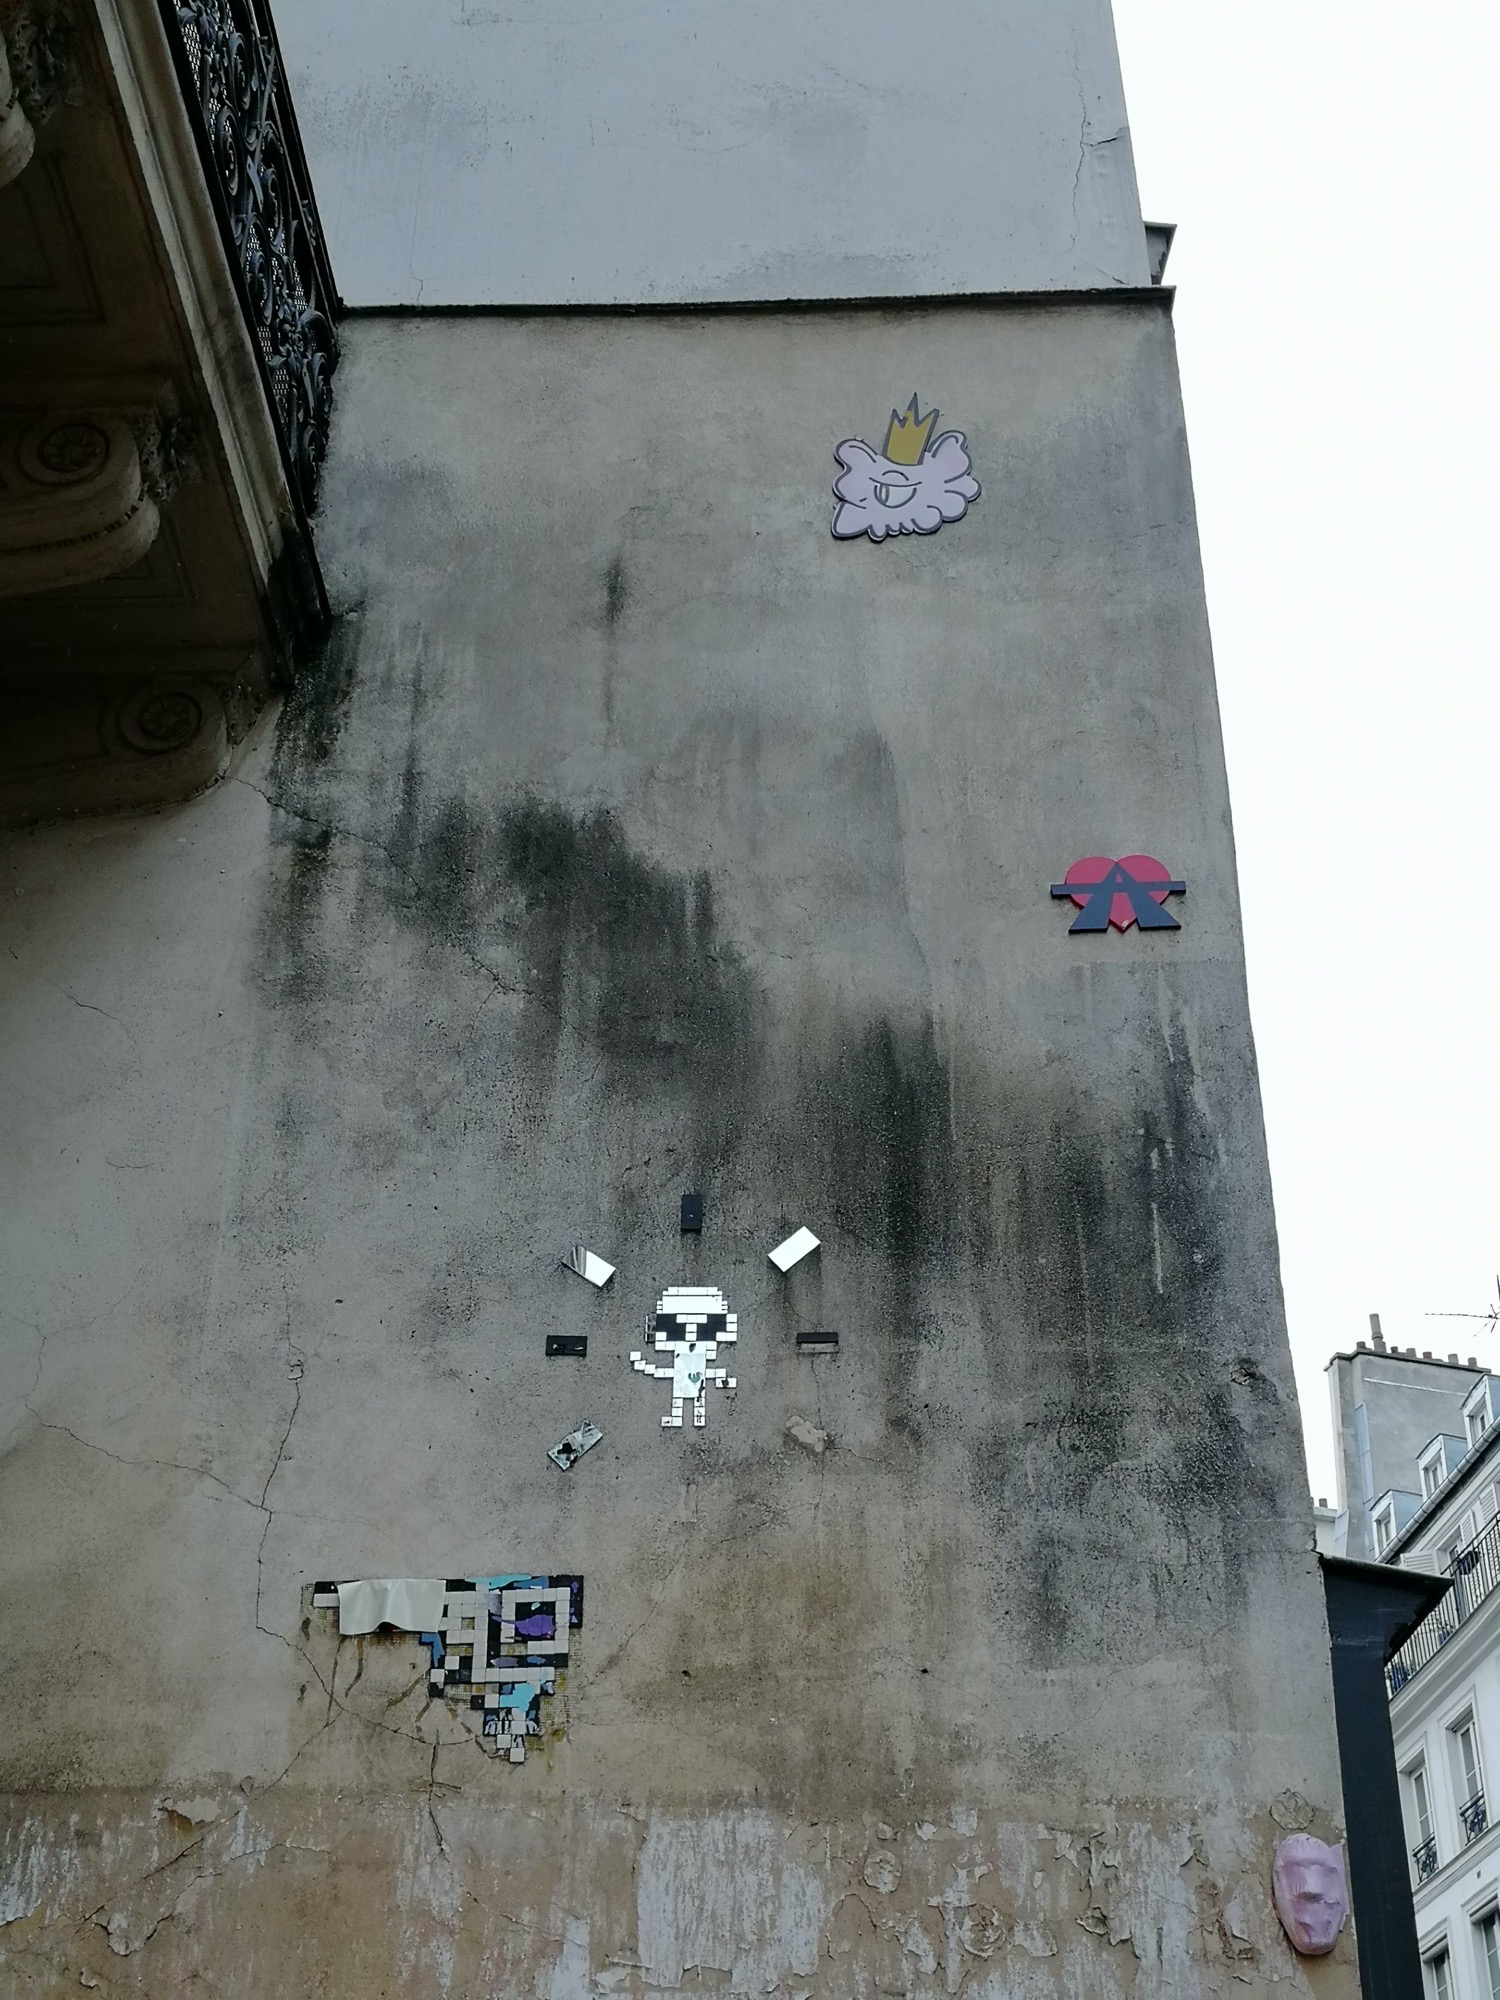 Graffiti 3225  by the artist A2 captured by Rabot in Paris France